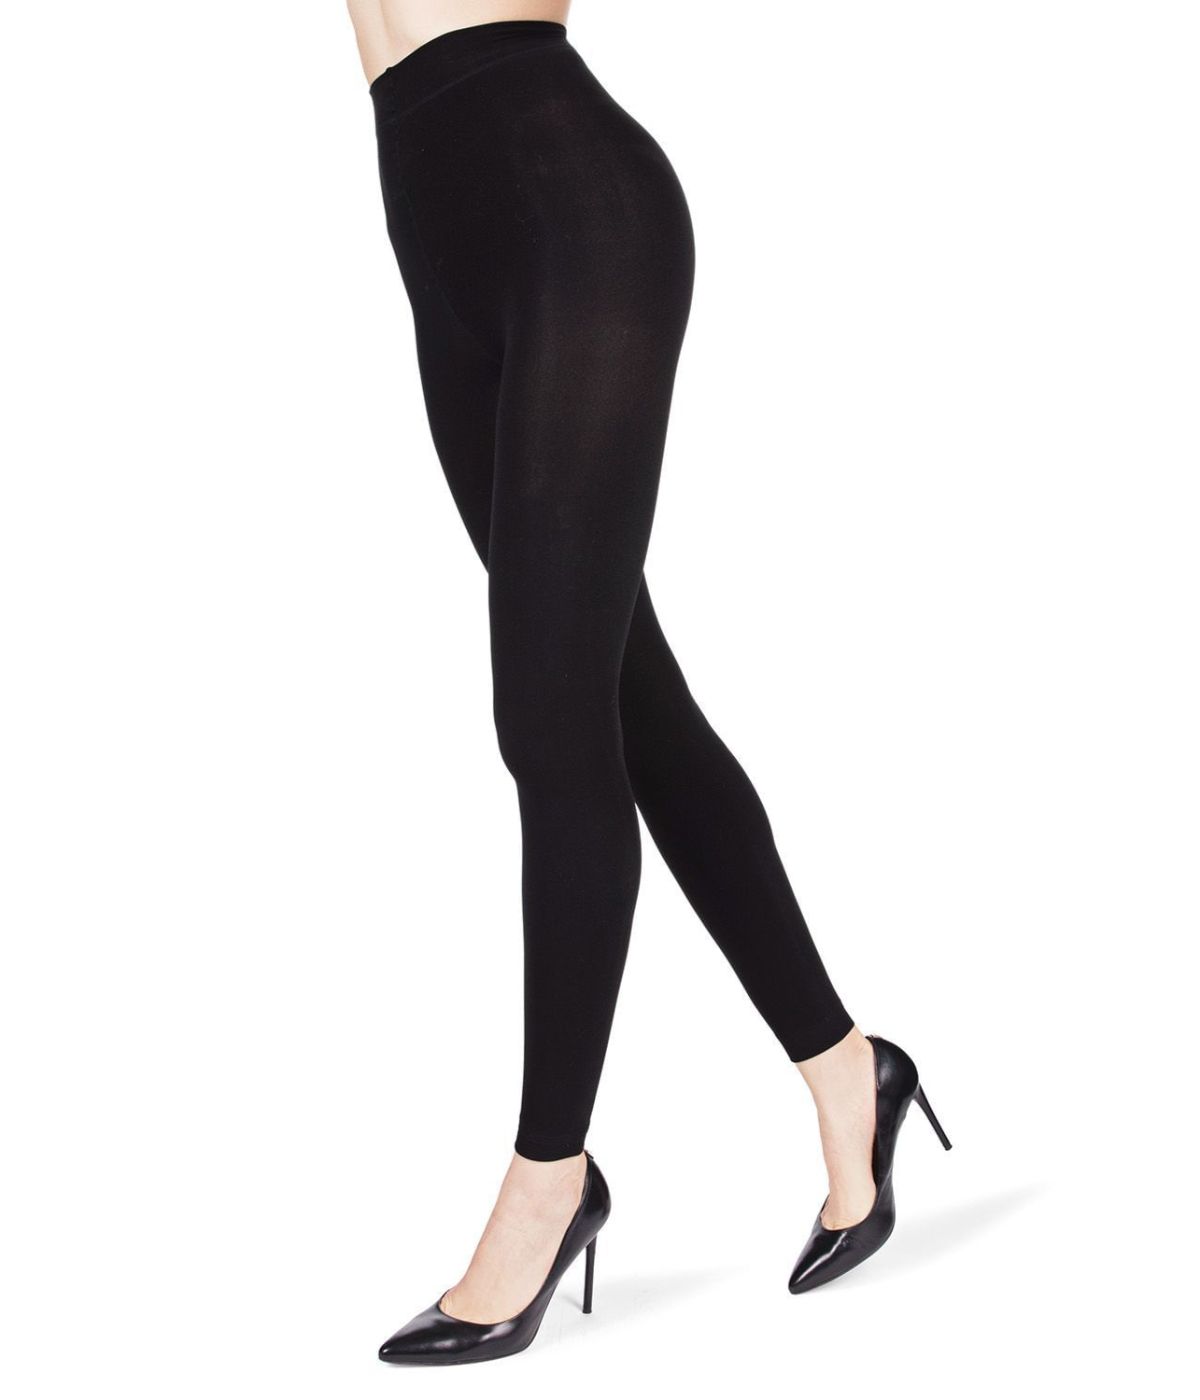 Blackout Thermal Heat Footless Tights Black